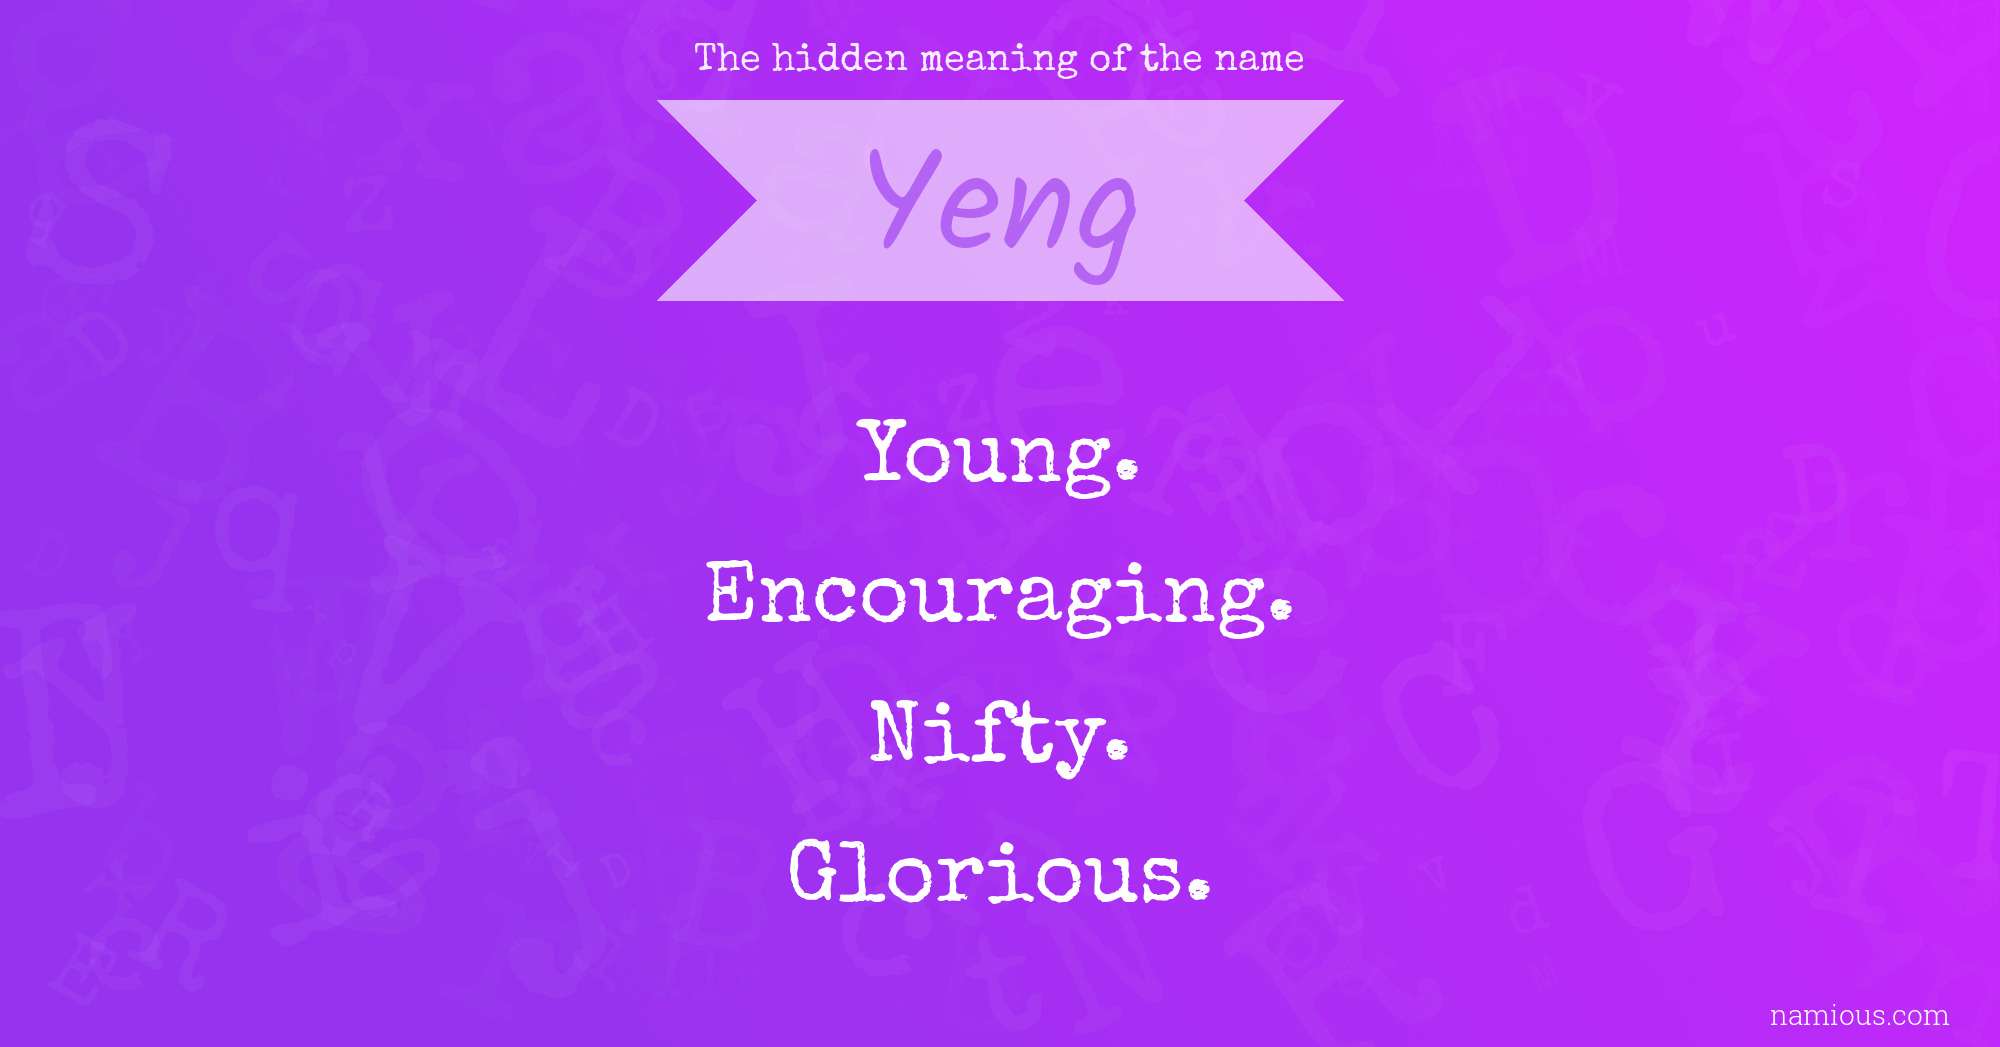 The hidden meaning of the name Yeng